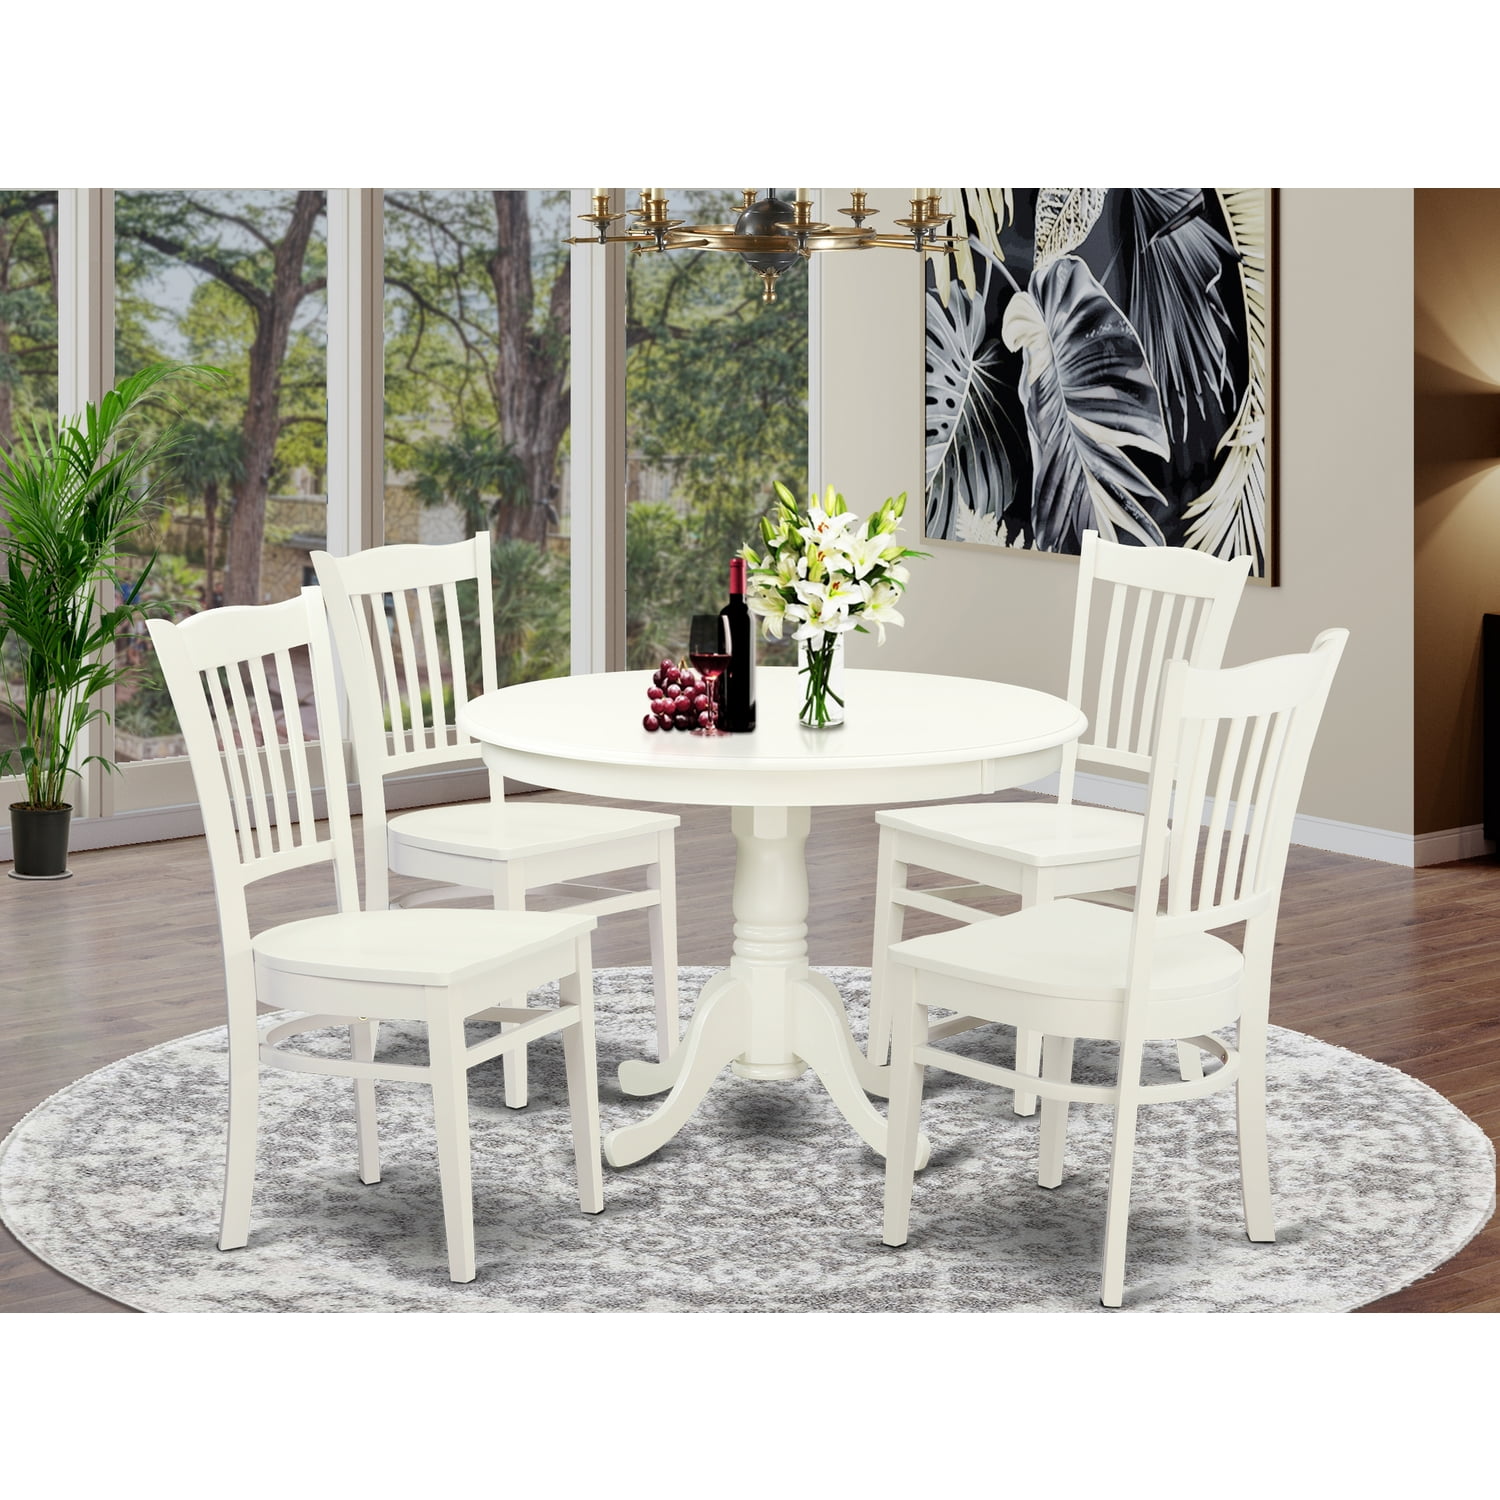 Wood Dinette Chairs Finish Linen White, Wood Round Tables And Chairs